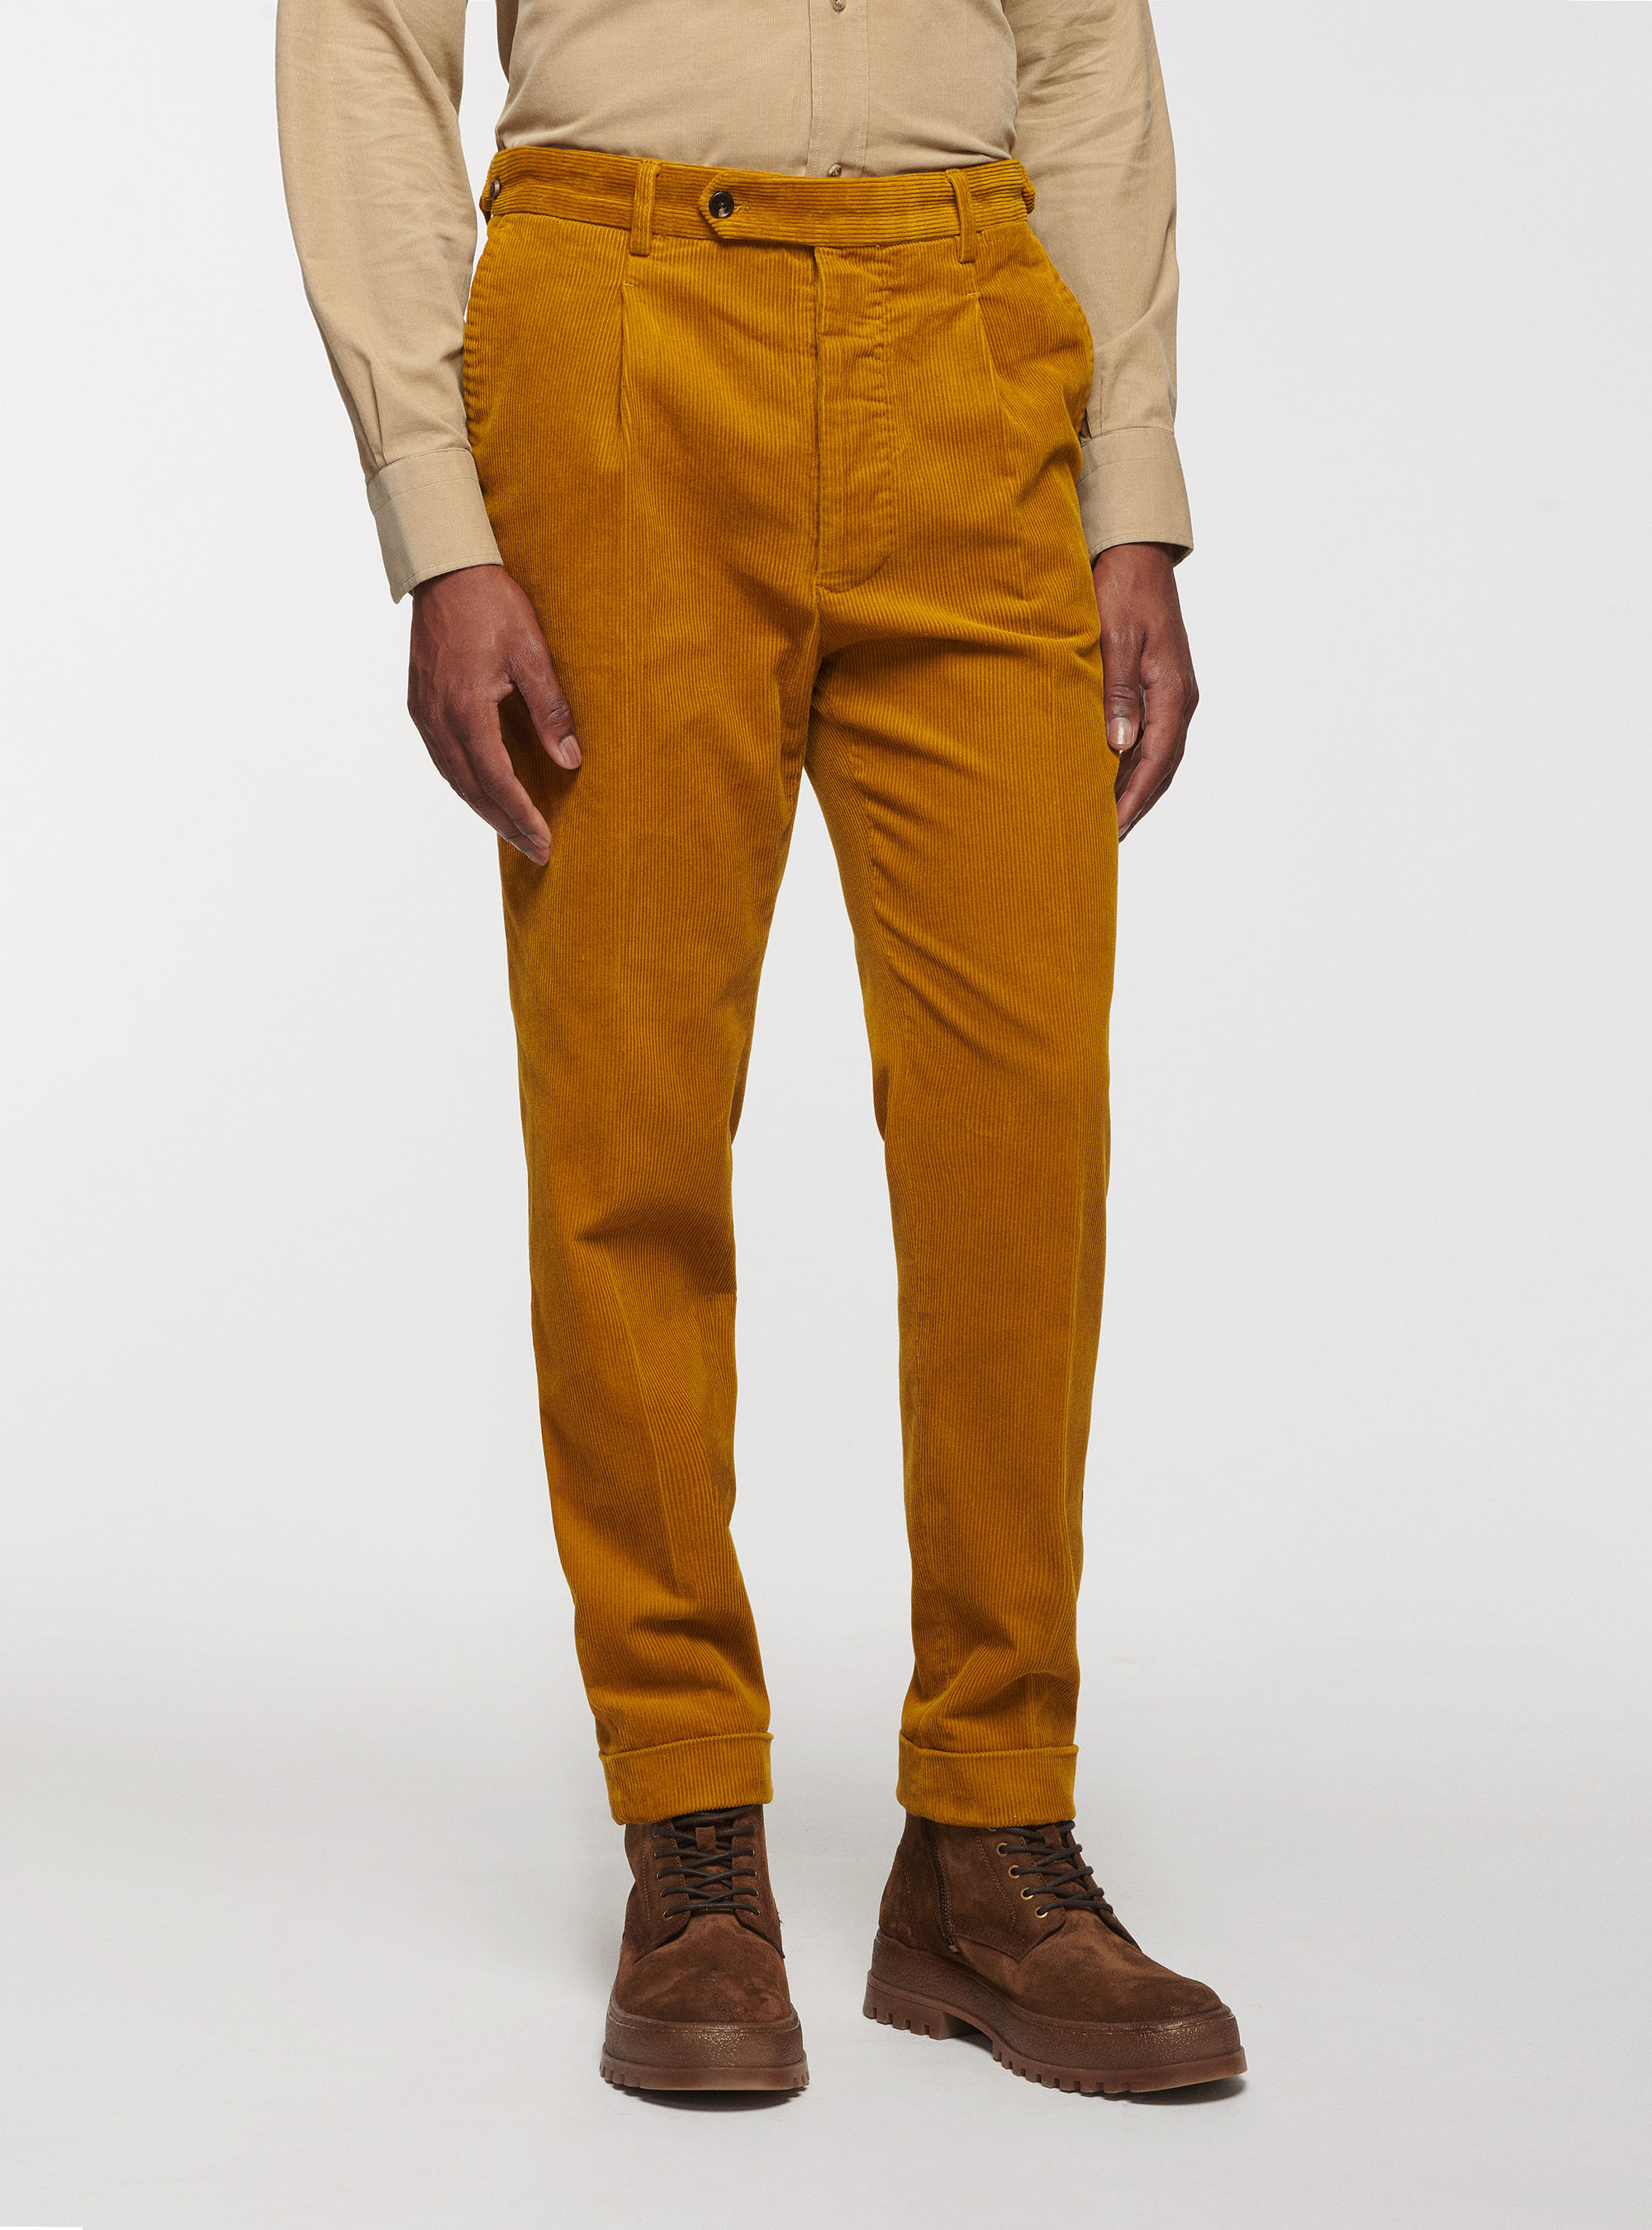 Modern Types of Pants All Stylish Men Should Have In Their Wardrobe